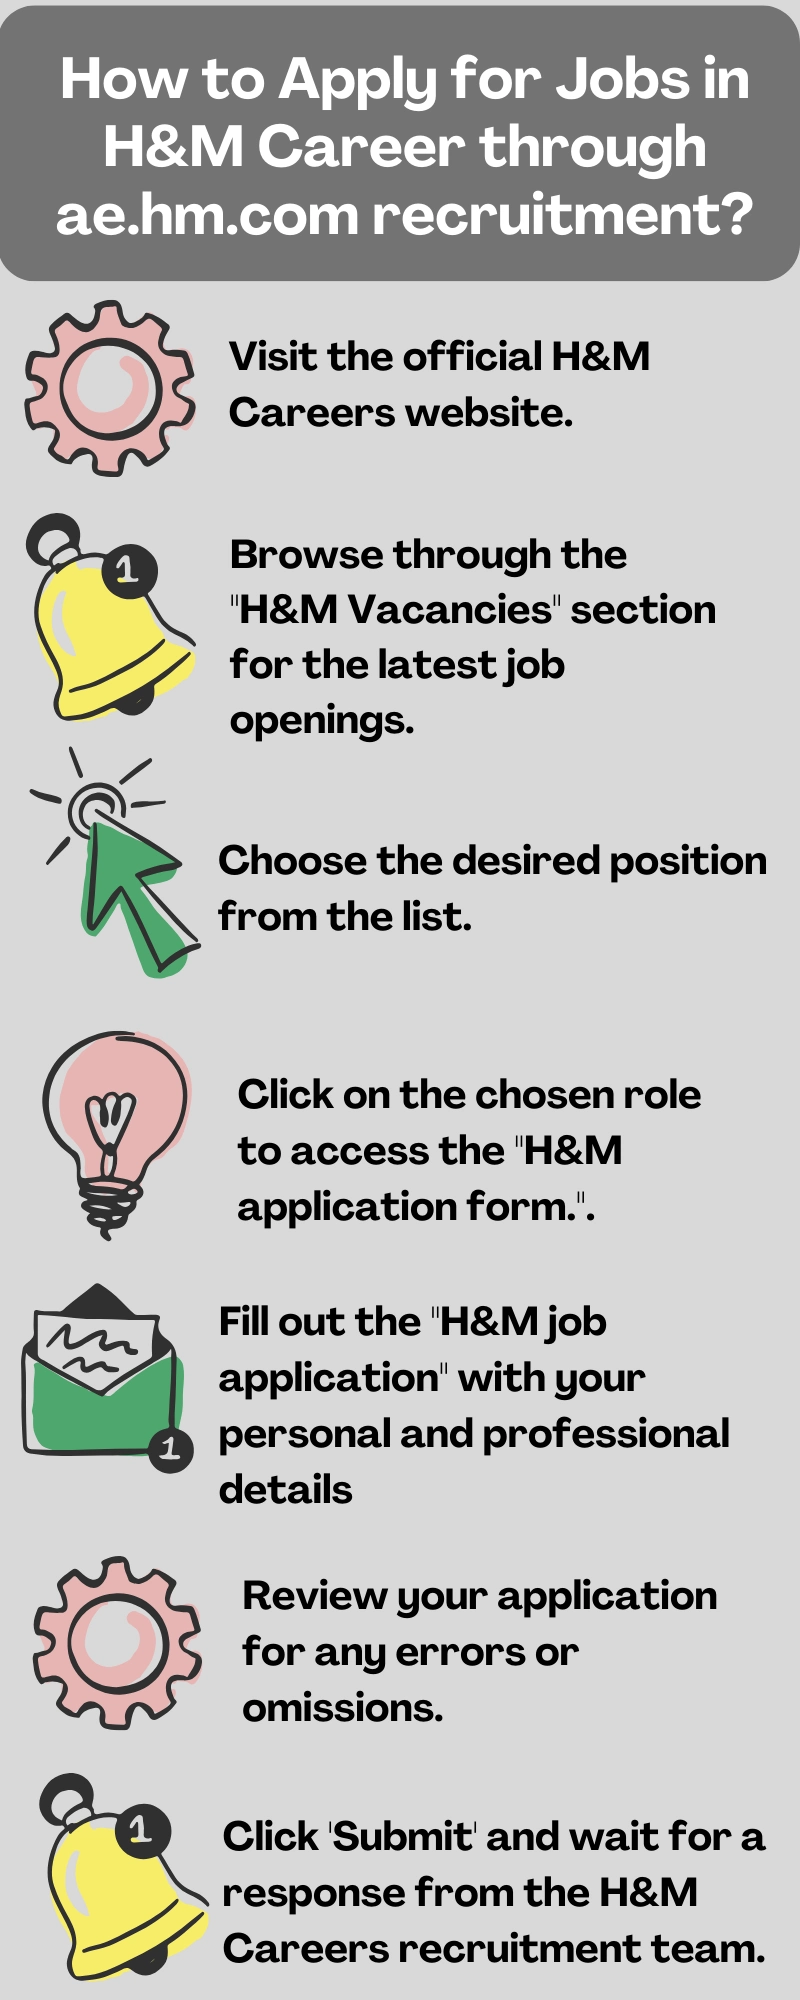 How to Apply for Jobs in H&M Career through ae.hm.com recruitment?